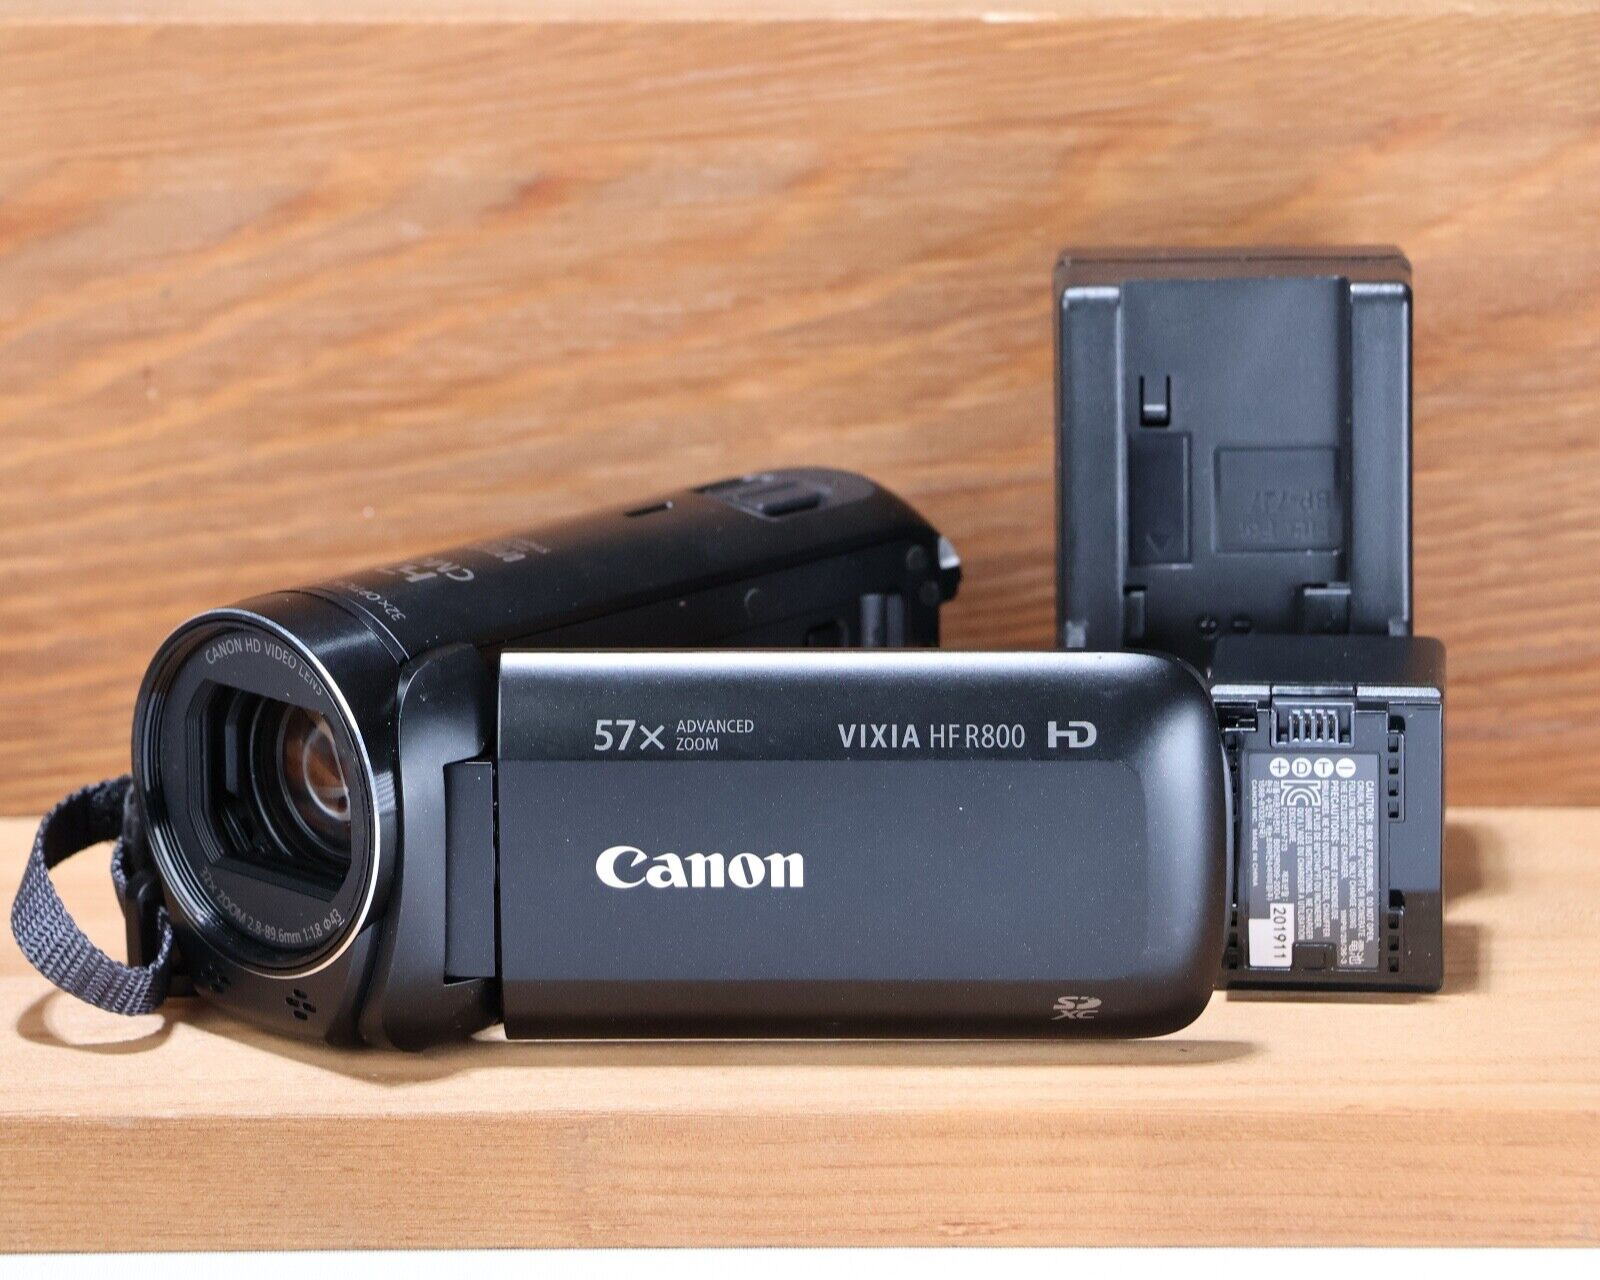 Canon VIXIA HF R800 57x Zoom HD Camcorder *TESTED* But haze on LCD and lens - $89.05